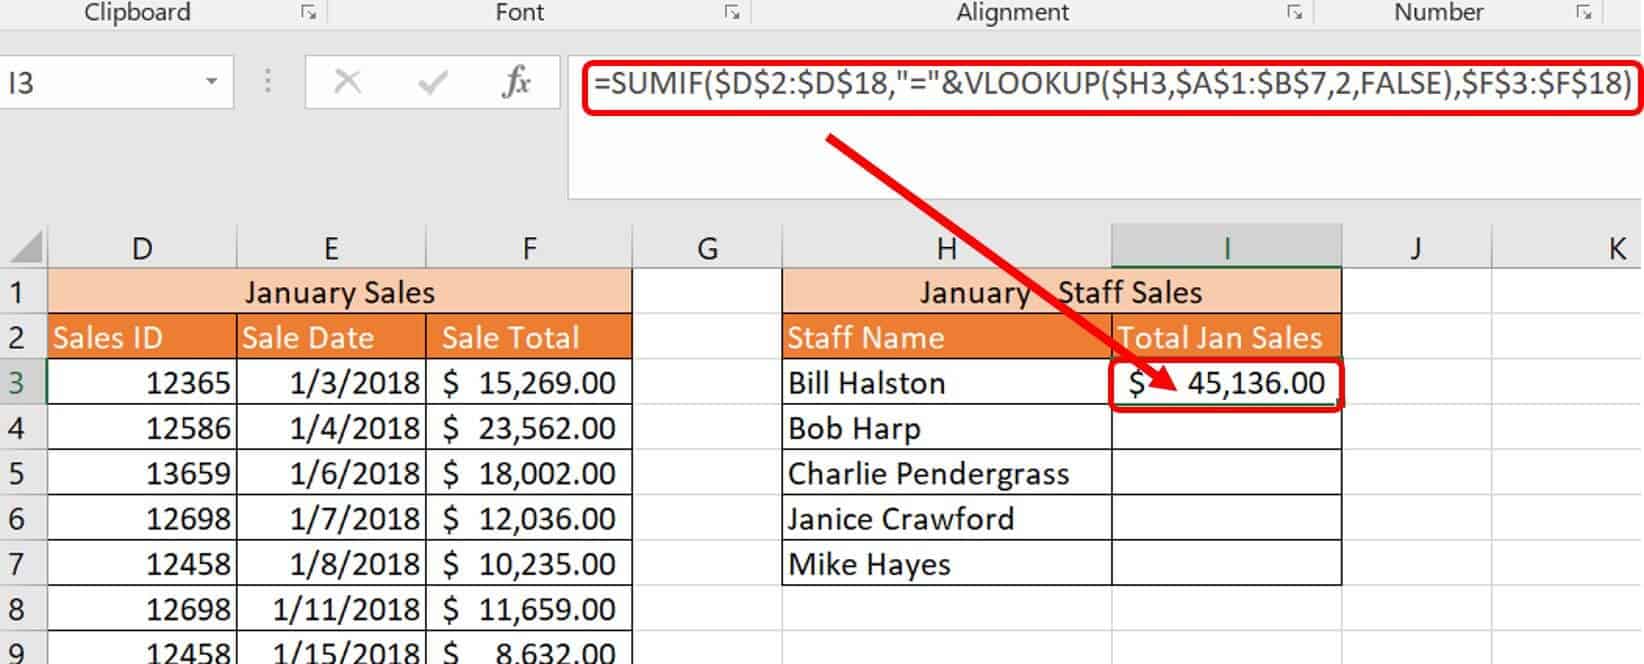 Vlookup multiple SUMIF example